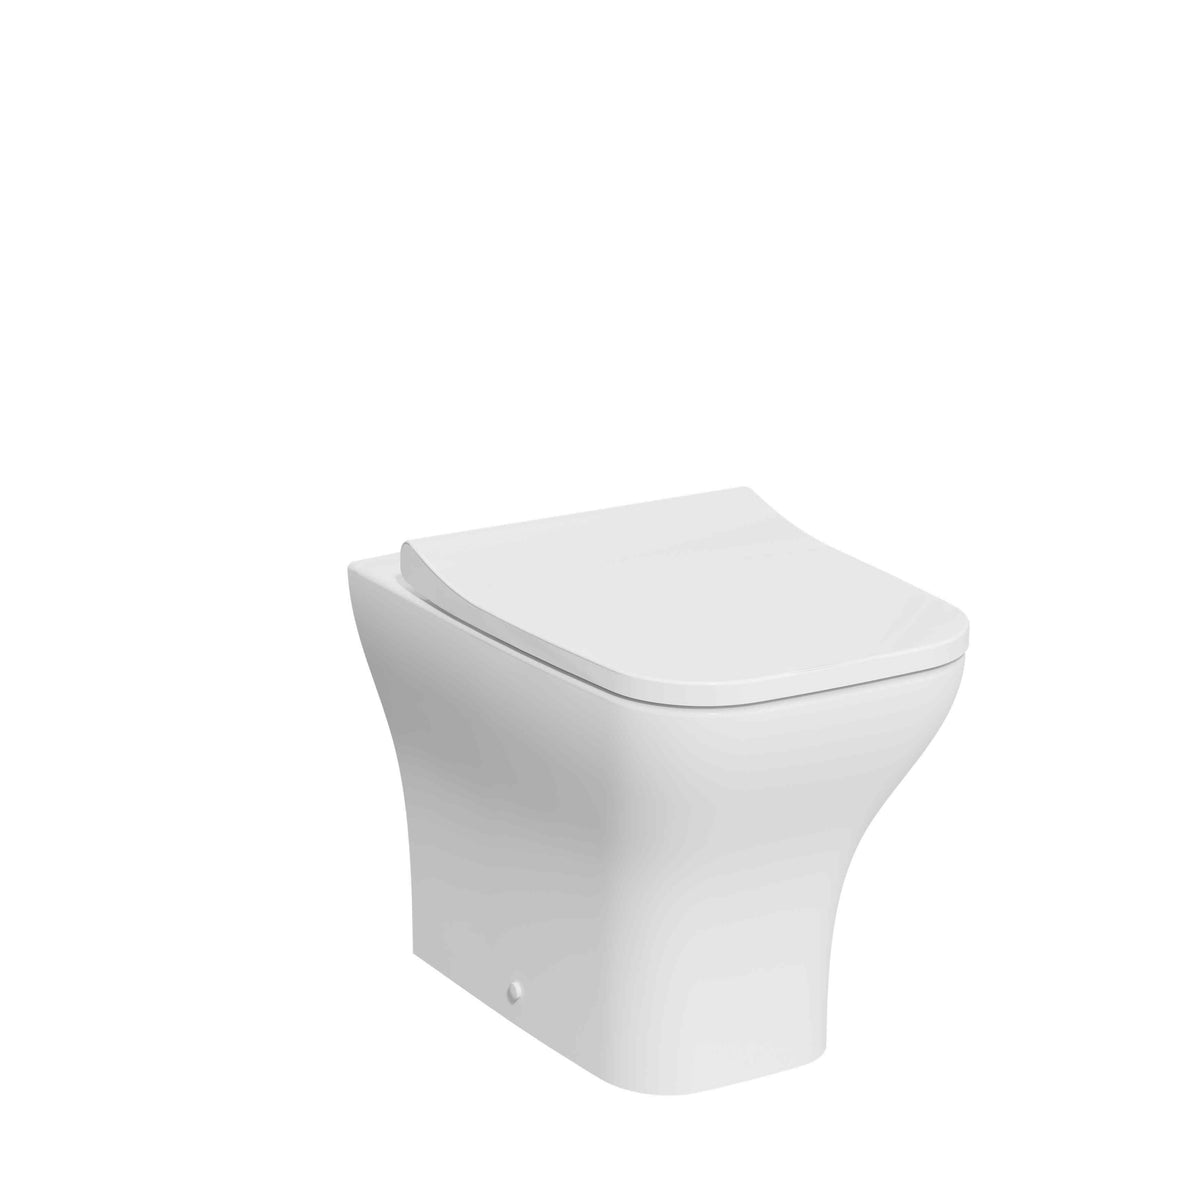 Kartell UK Eklipse Square Back to Wall Pan with Rimless Design and Soft Close Seat